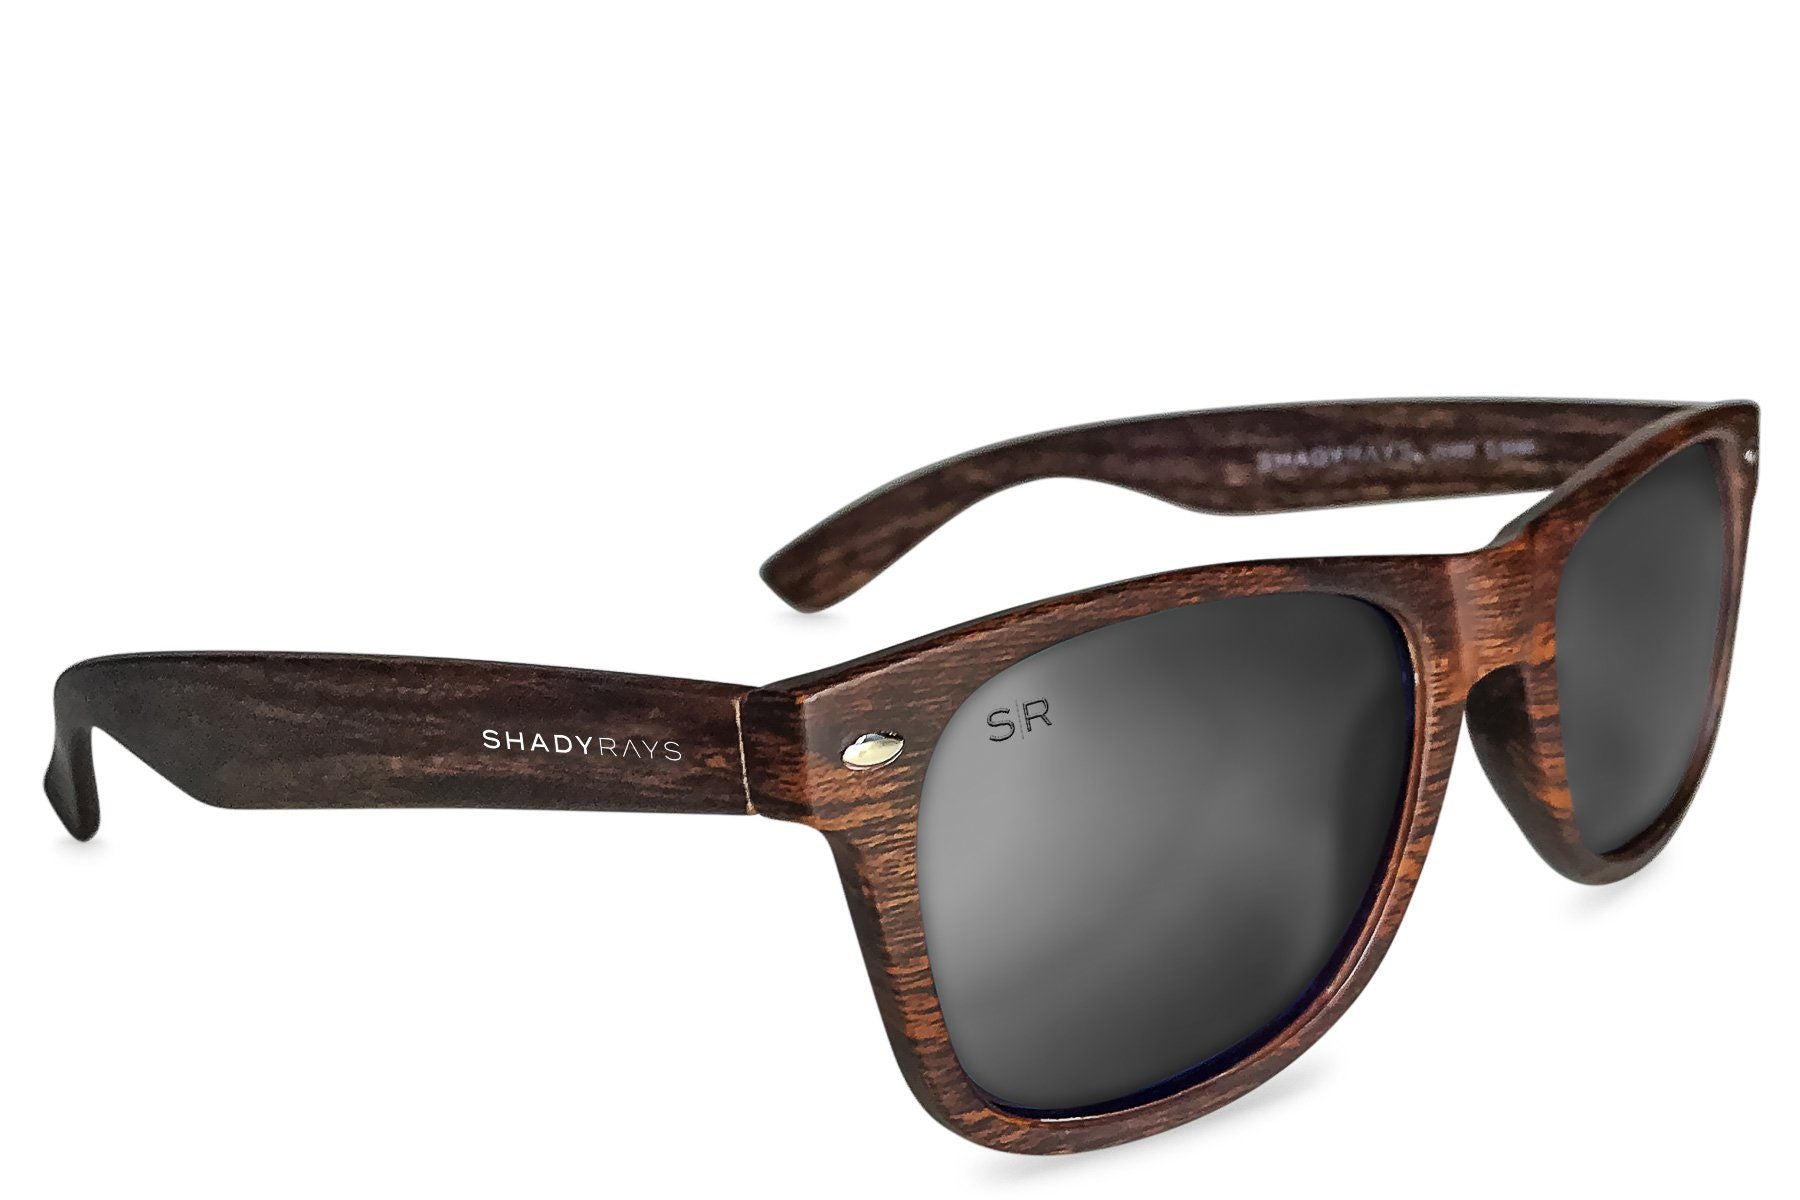 Classic Timber - Deep Timber Polarized Sunglasses | Timber Brown Sunglasses | Best Christmas Gifts | Gifts for the Holidays | Unique Gifts for Friends